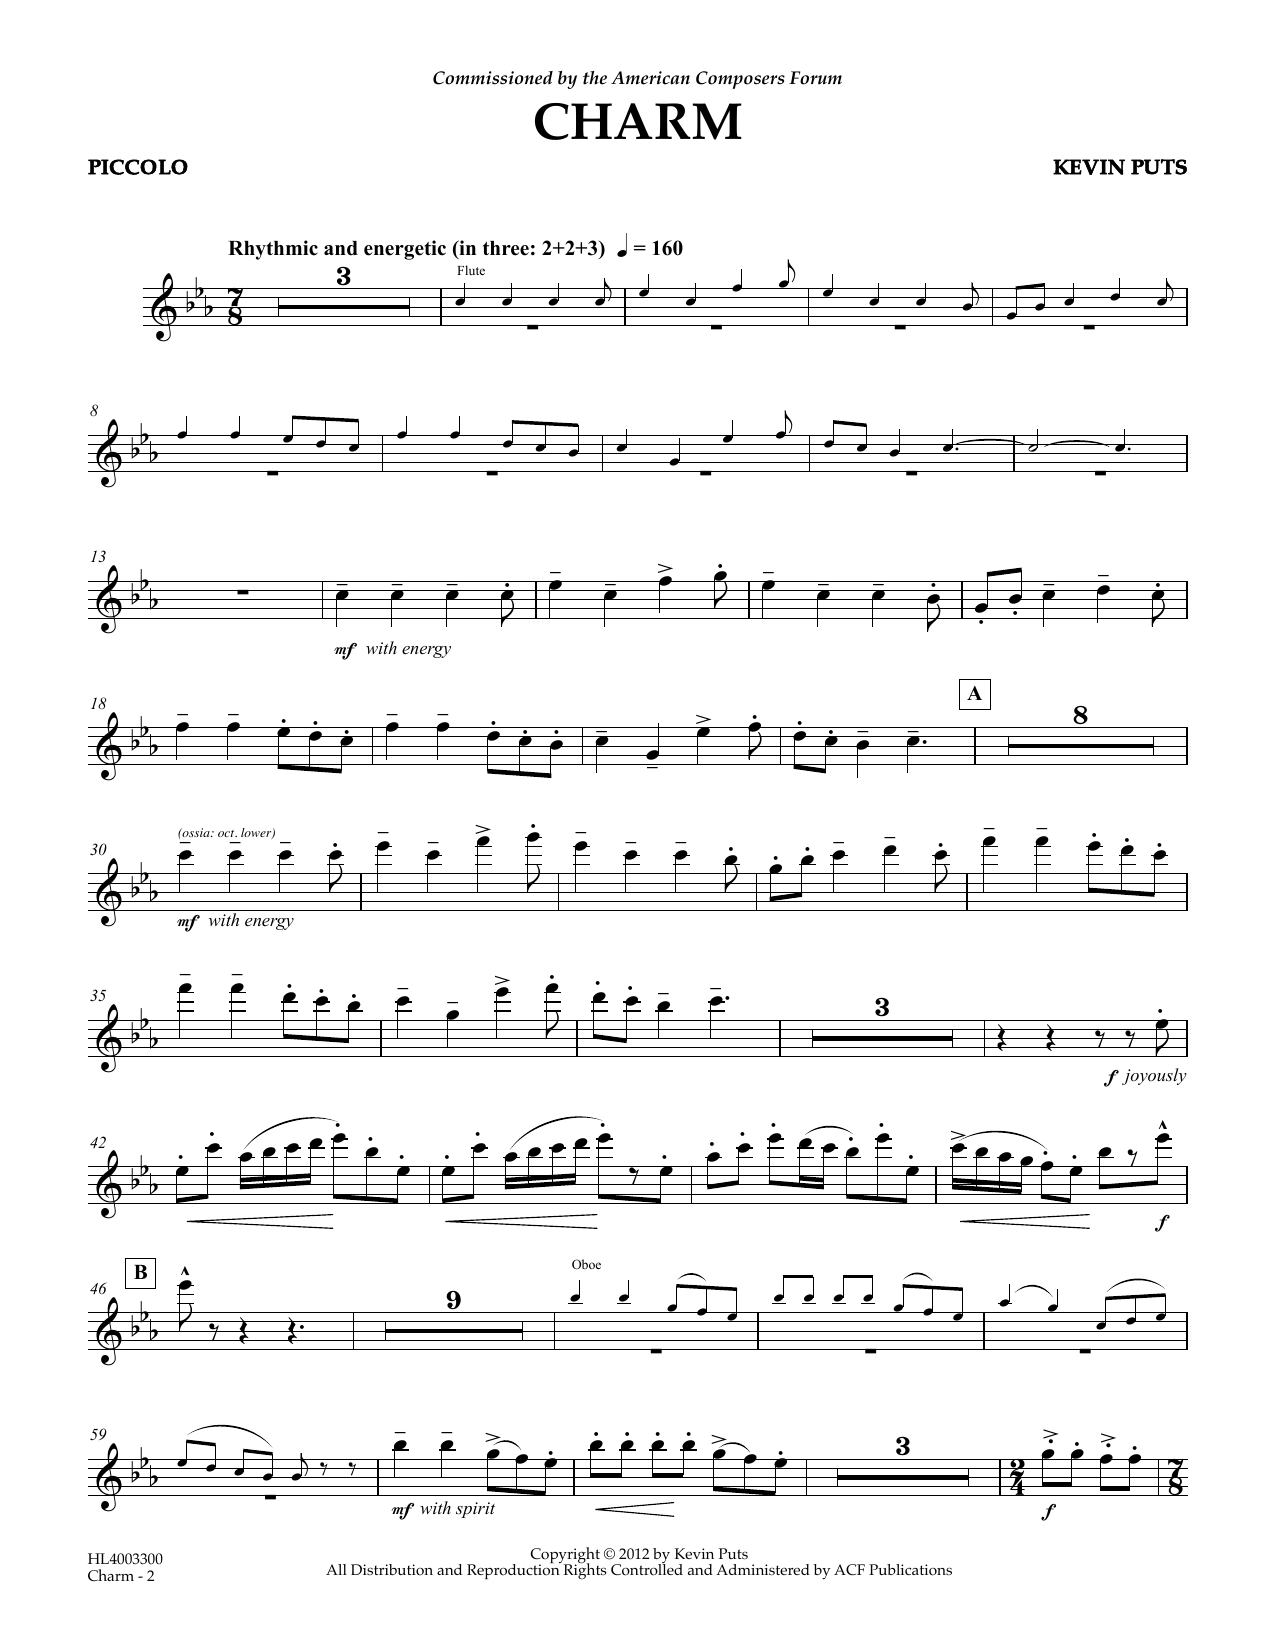 Download Kevin Puts Charm - Piccolo Sheet Music